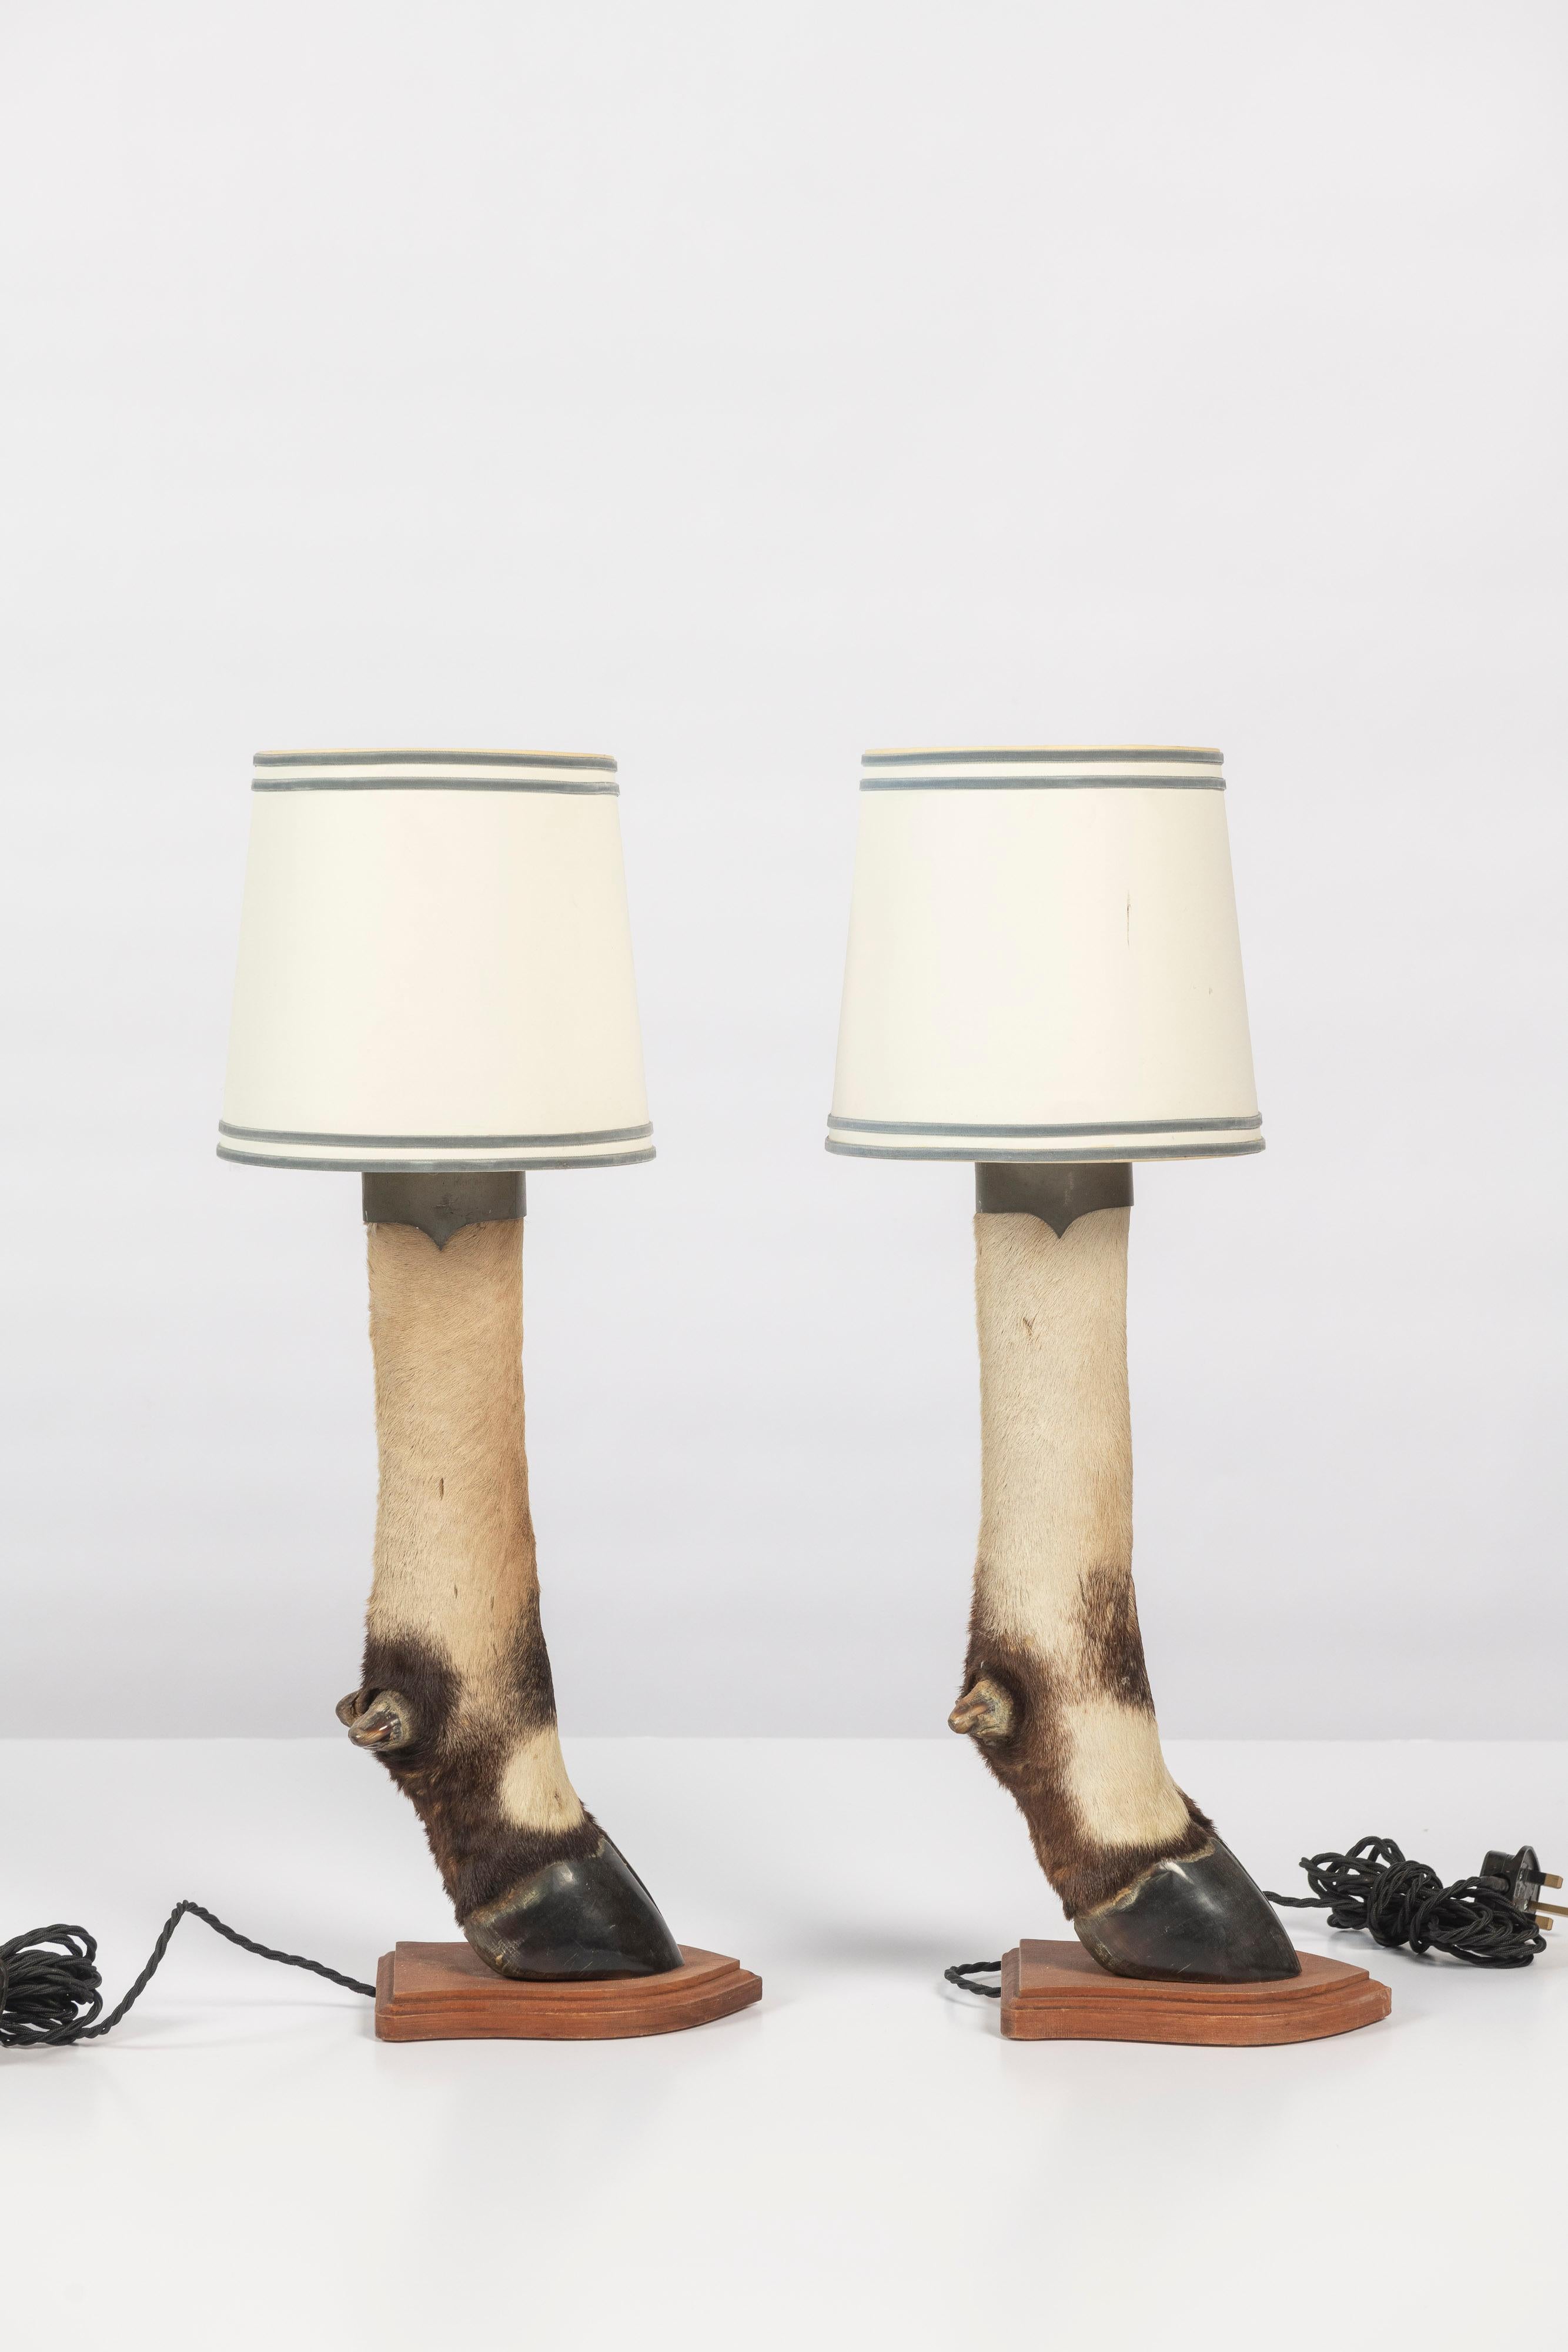 Two hoof table lamps with ivory shades. The taxidermy is mounted upon a small wooden shield, featuring a simple switch, wired for EU usage. The shades that are included are 8